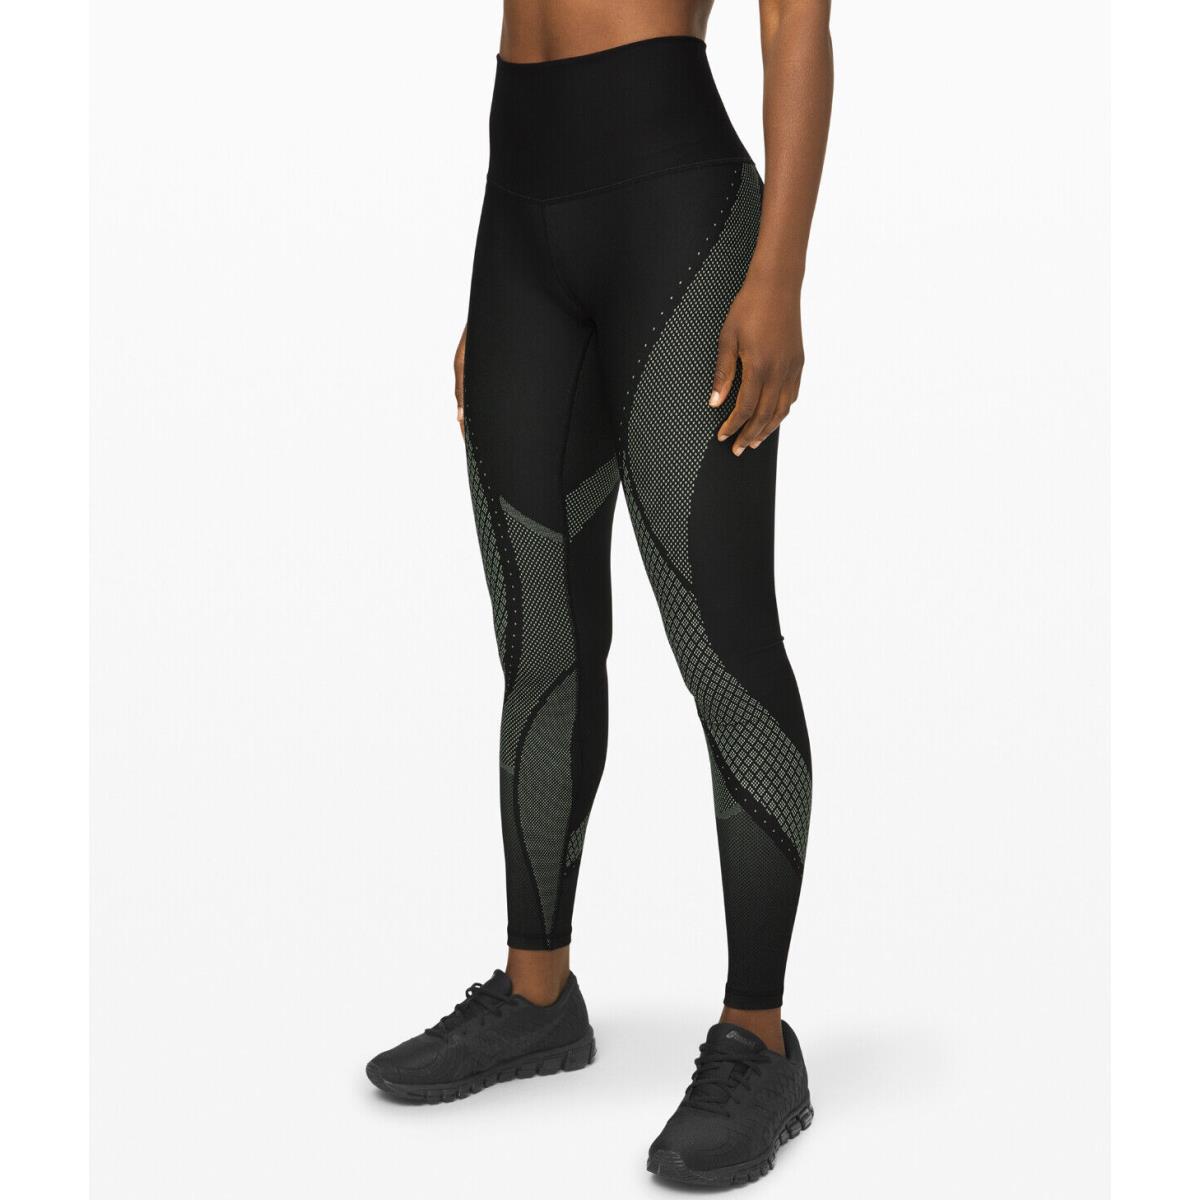 Lululemon Mapped Out Hight Rise Tight 28 Black/flord Flash Size 4 Rare